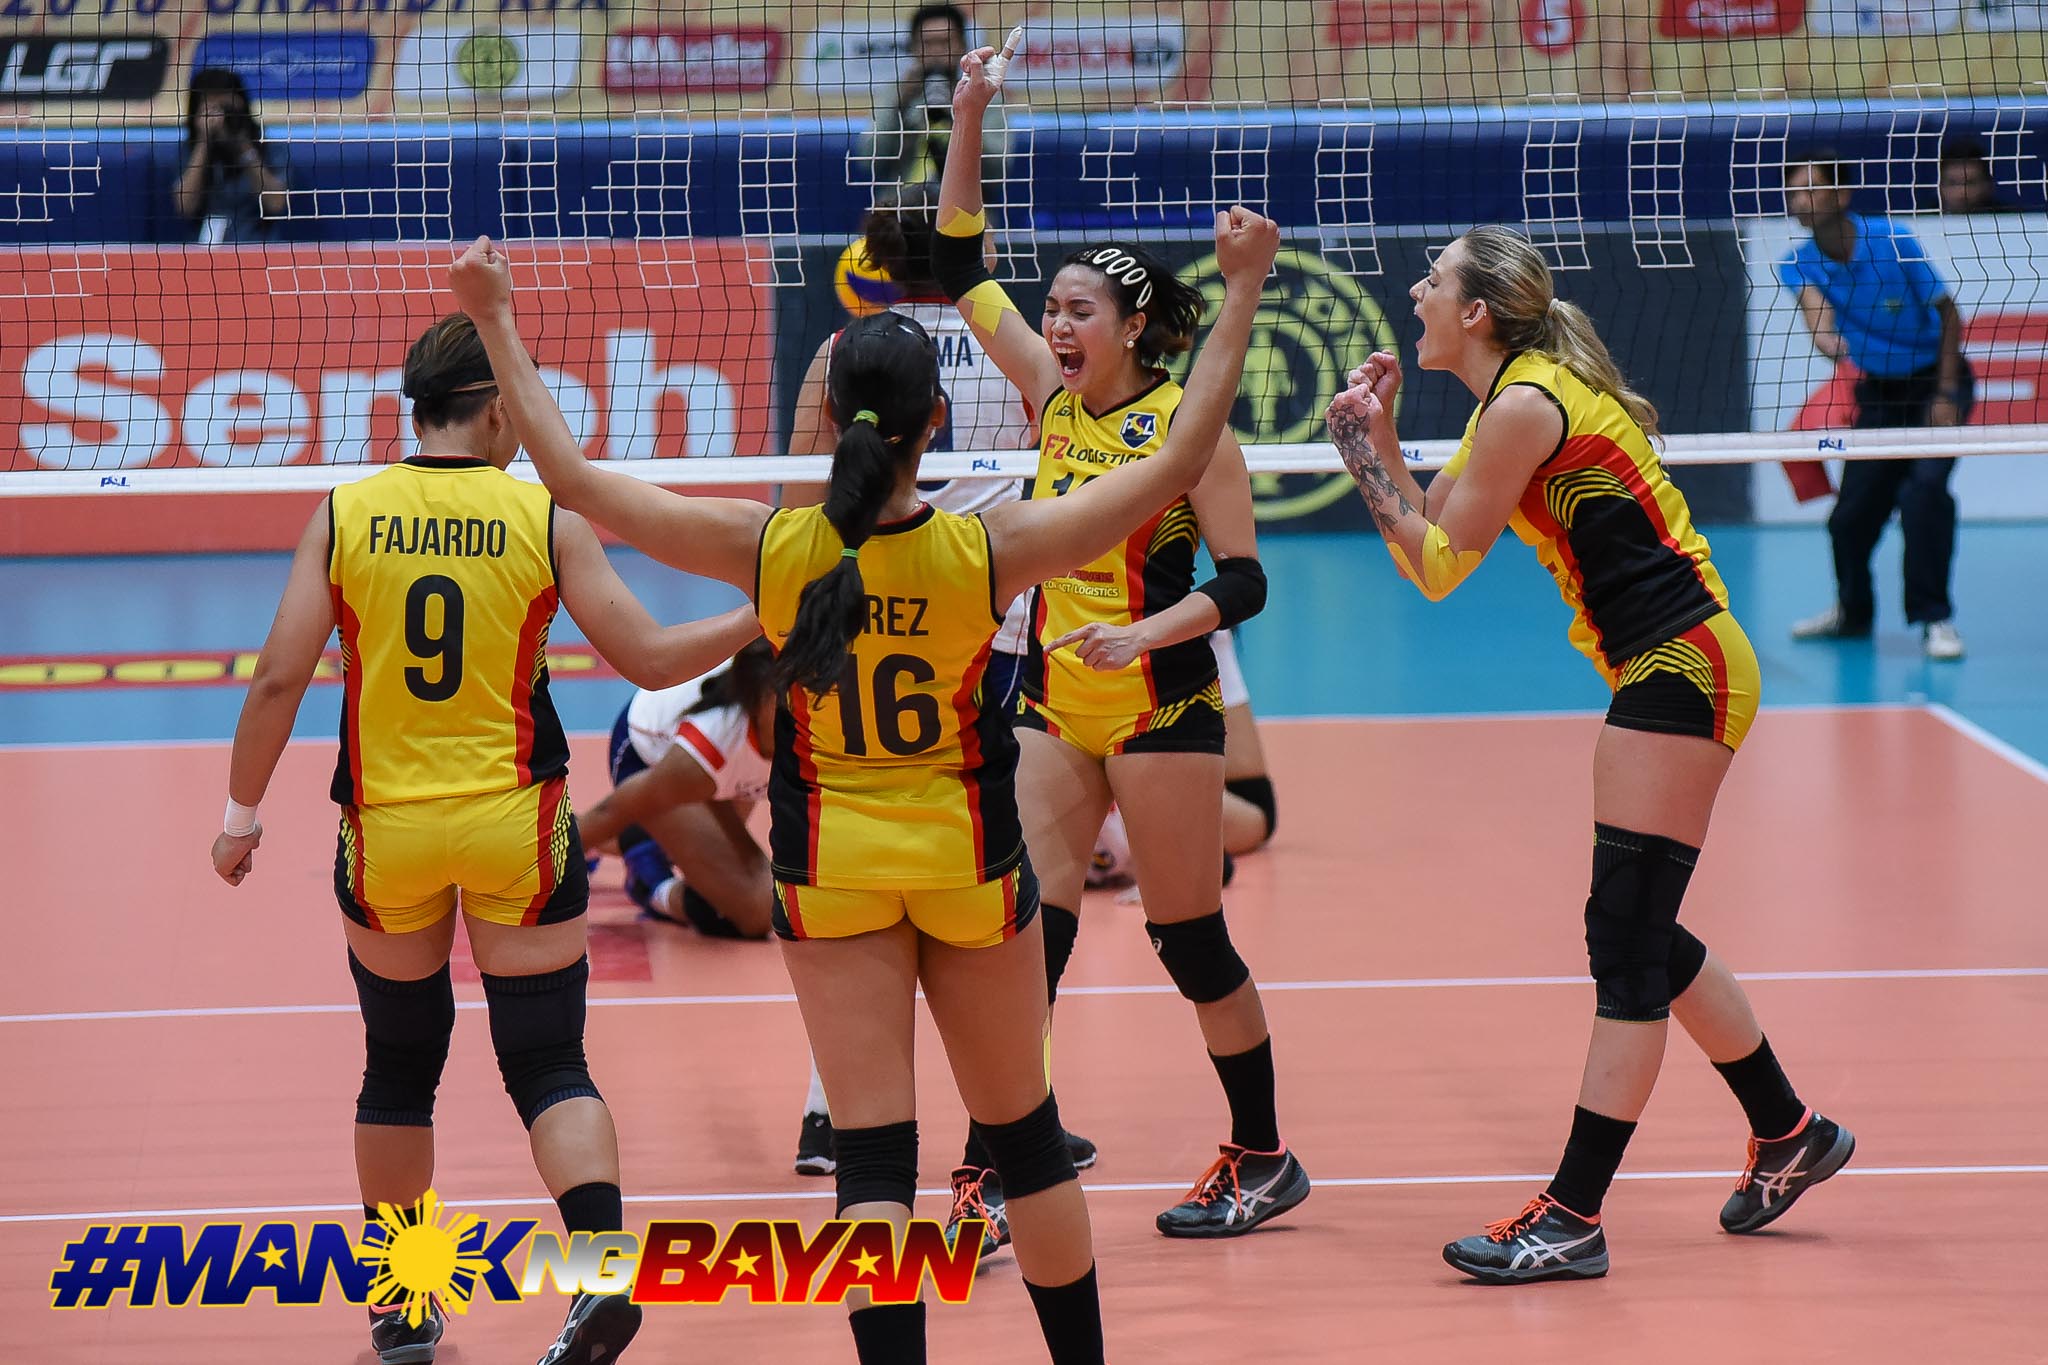 PSL-GP-2018-F2-Logistics-vs.-Petron-Marano-4826 Cargo Movers pull inspiration from sisters Lady Spikers' championship win News PSL Volleyball  - philippine sports news